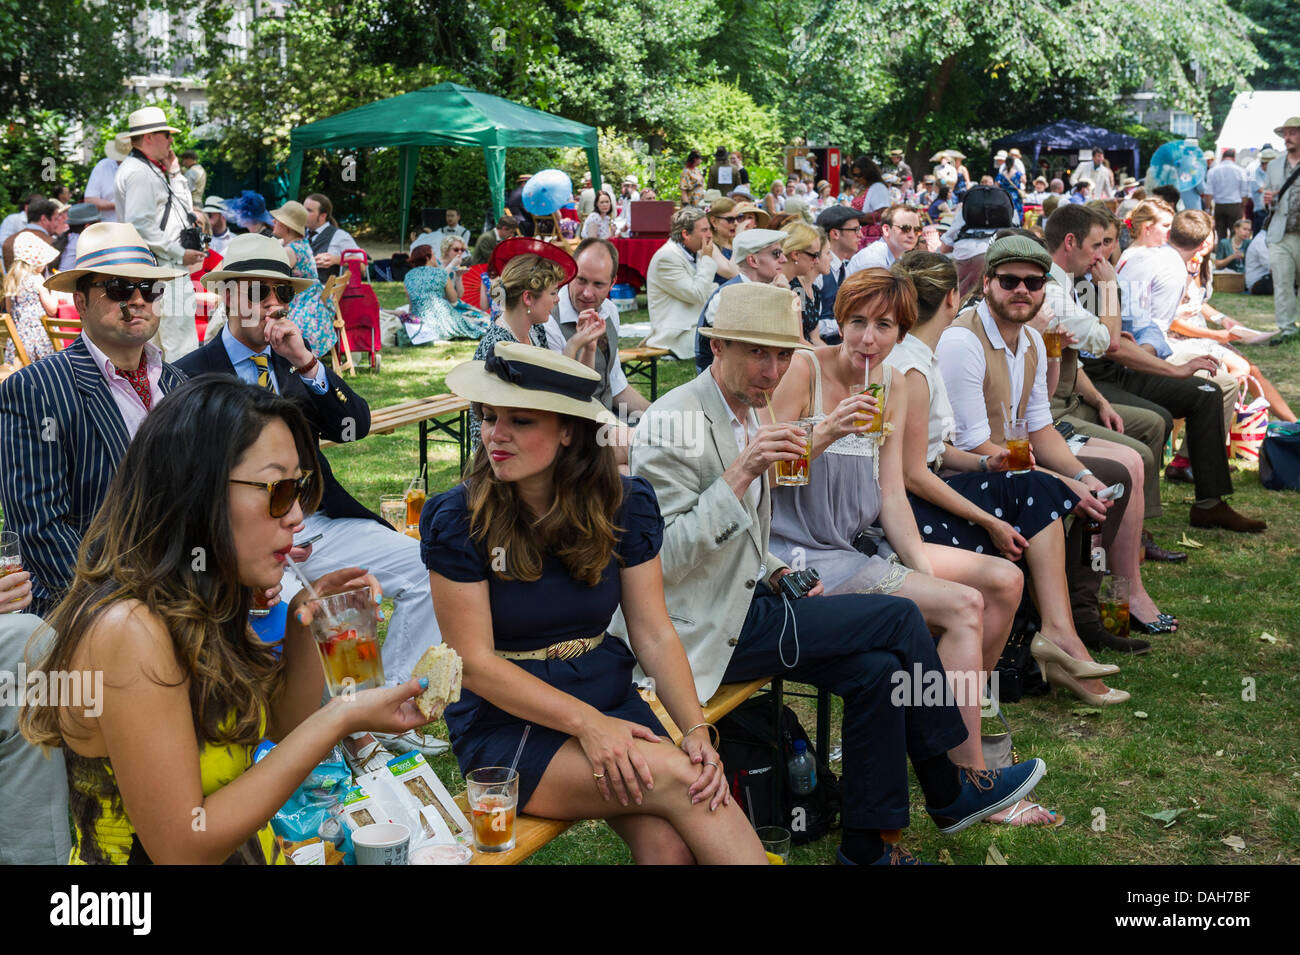 London, UK. 13 July 2013.  Spectators enjoying themselves at the Chaps Olympiad in Bedford Square Gardens in London.  Alamy Live News.  Photographer: Gordon Scammell/Alamy Live News Stock Photo